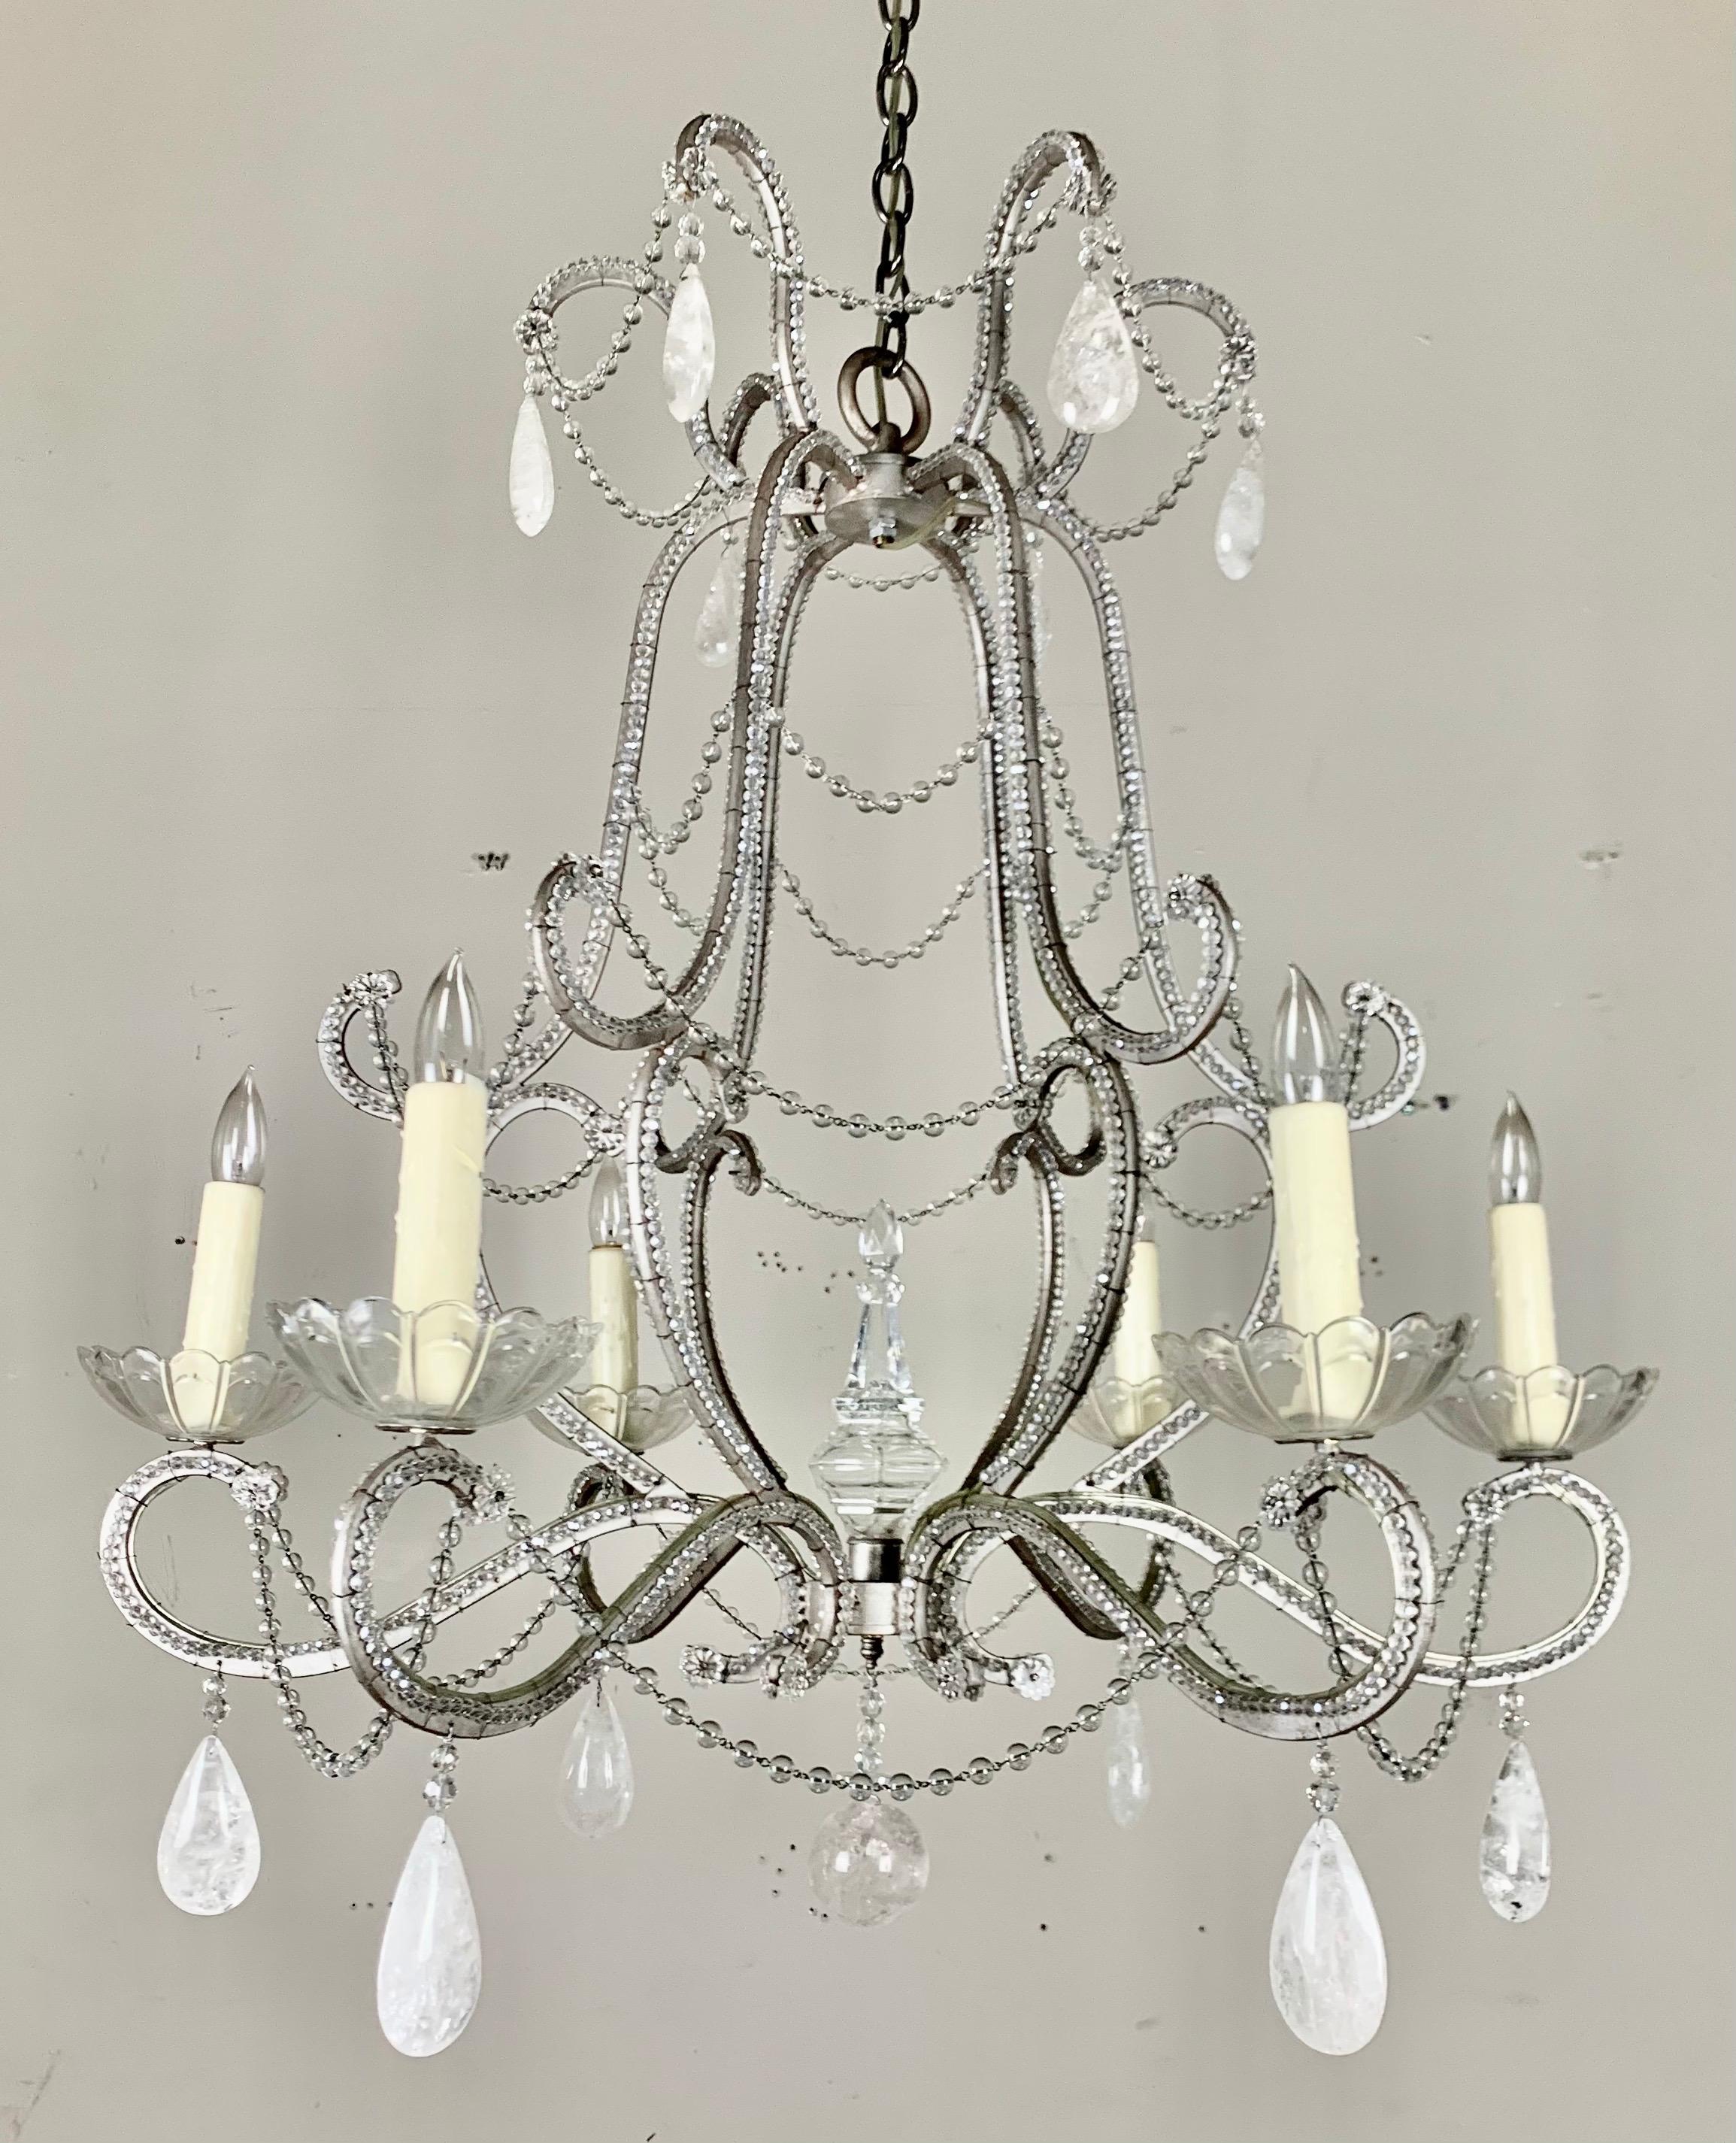 Six light rock crystal beaded silvered metal chandelier with beaded frame. The chandelier is adorned with almond shaped rock crystals throughout. The elegant fixture is newly rewired with drip wax candle covers and includes chain and canopy.